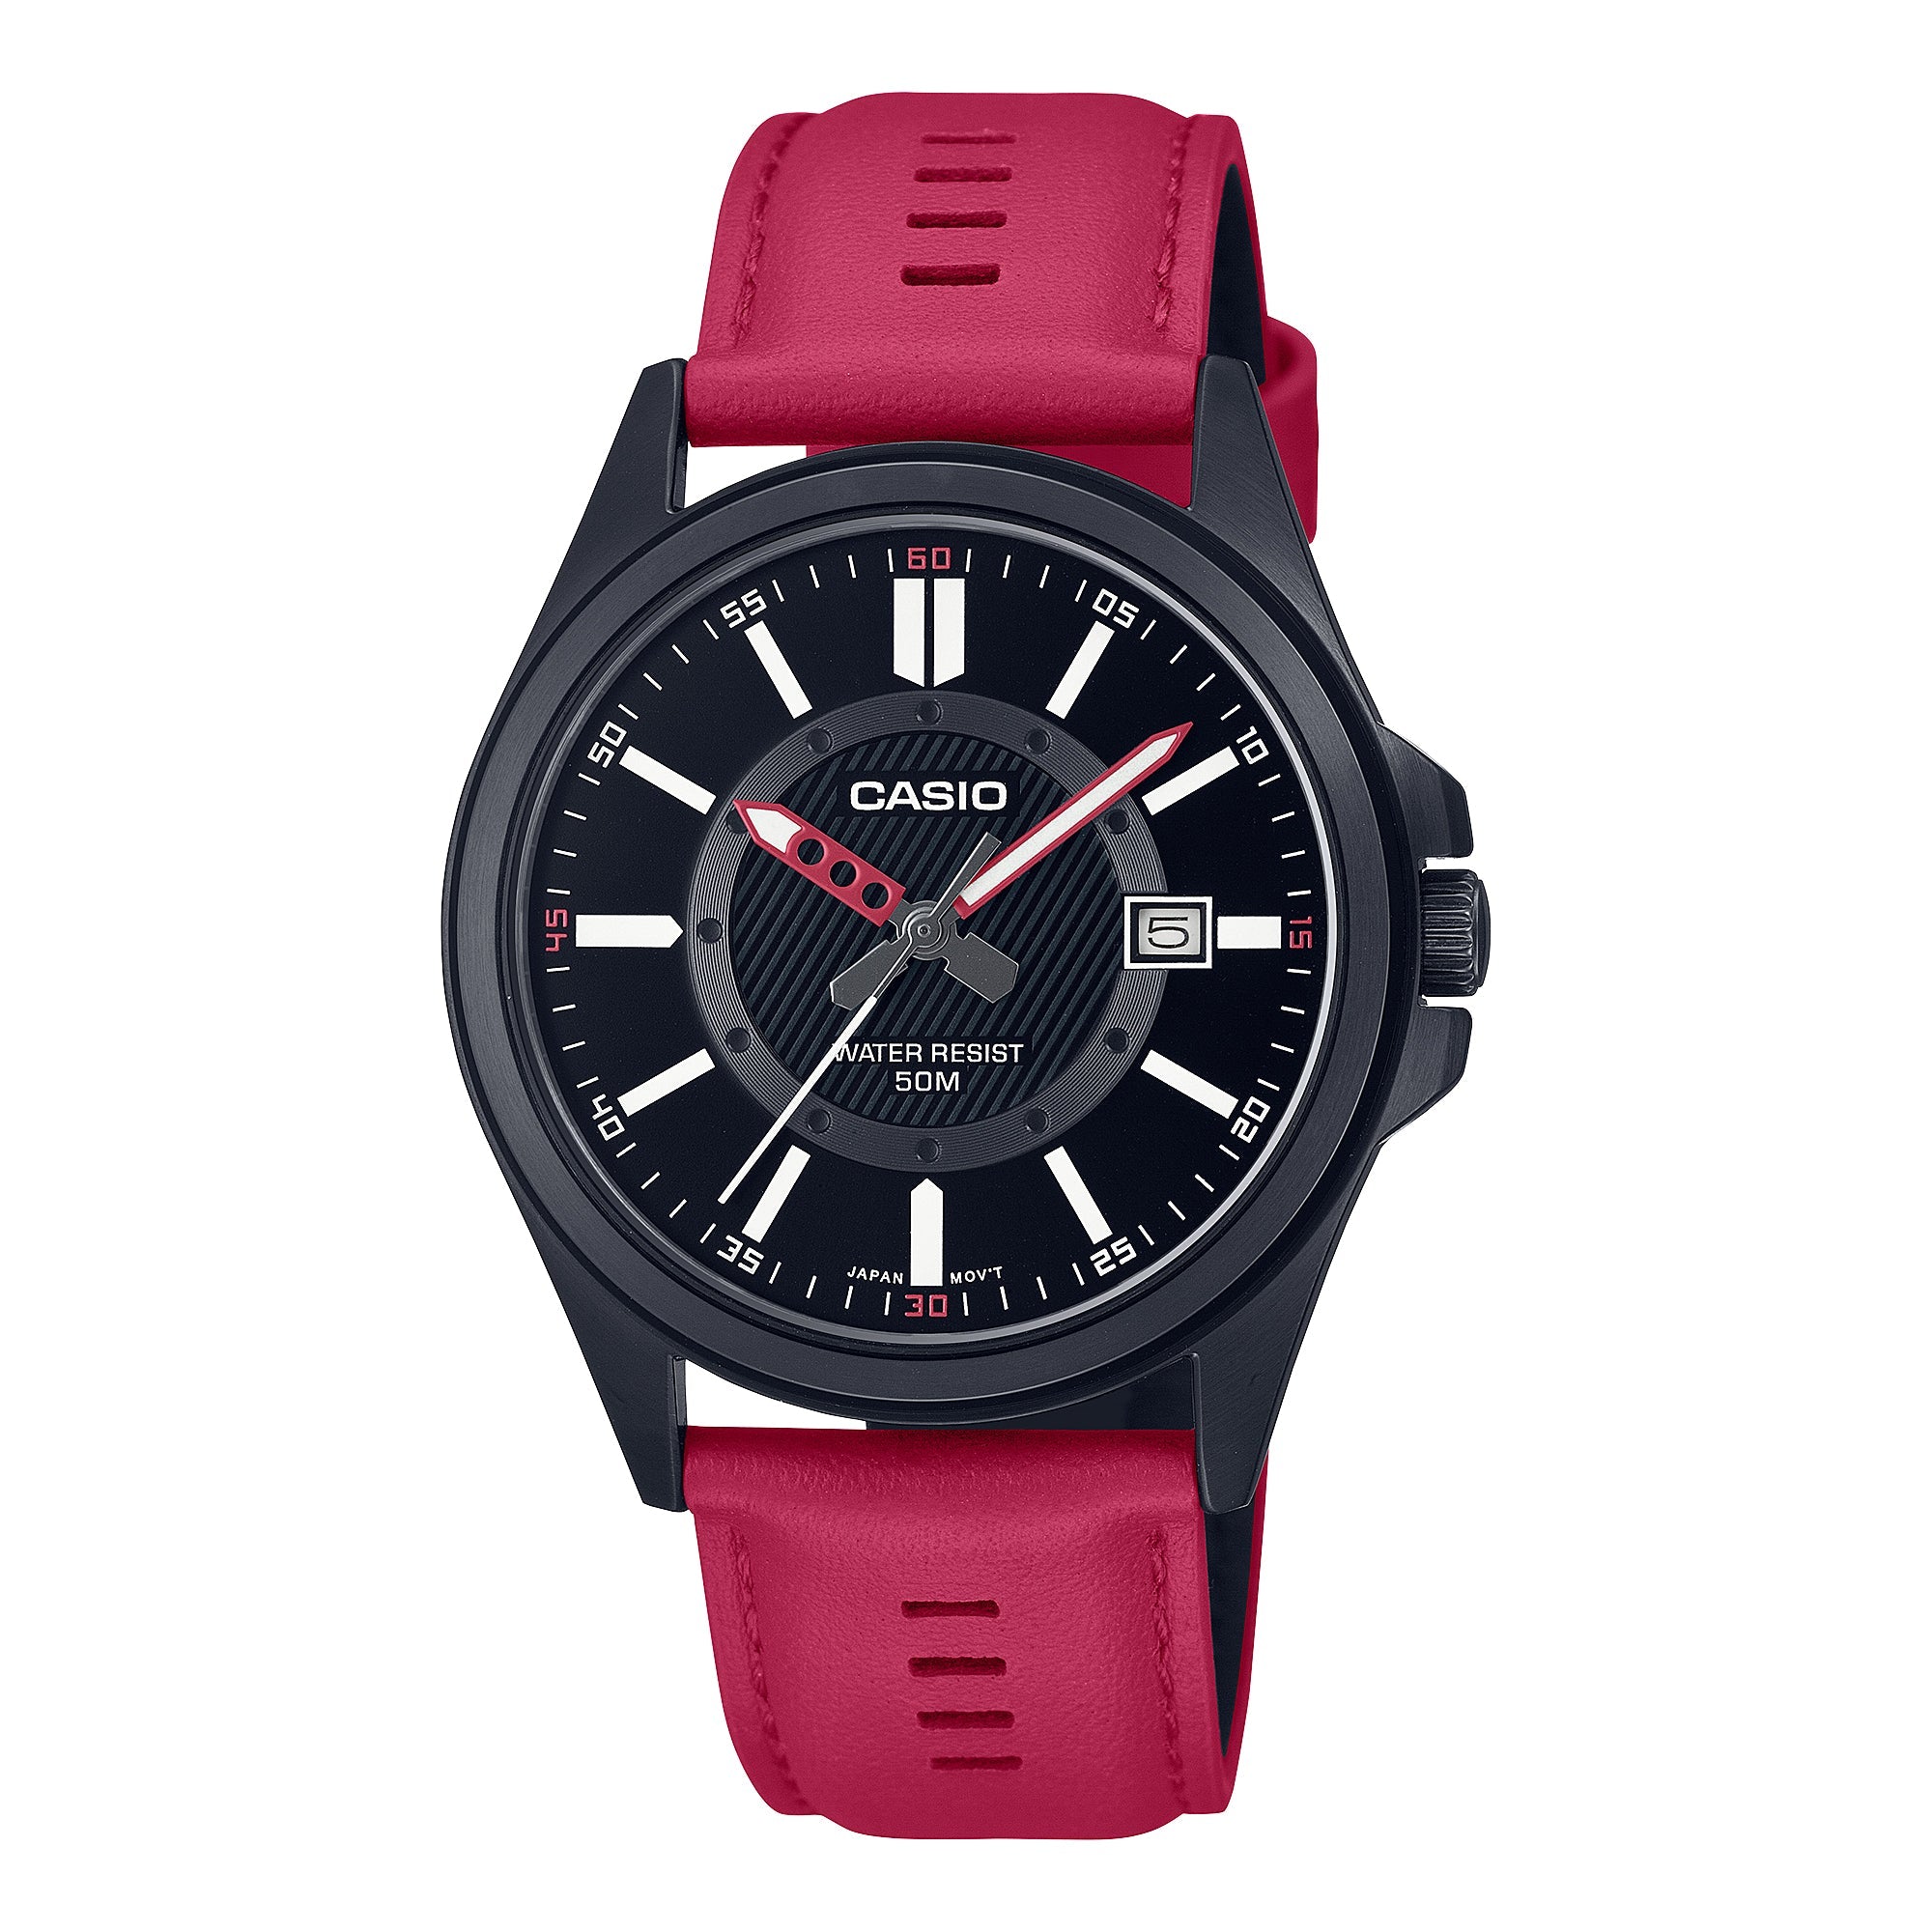 Casio Men's Analog Red Leather Strap Watch MTPE700BL-1E MTP-E700BL-1E Watchspree